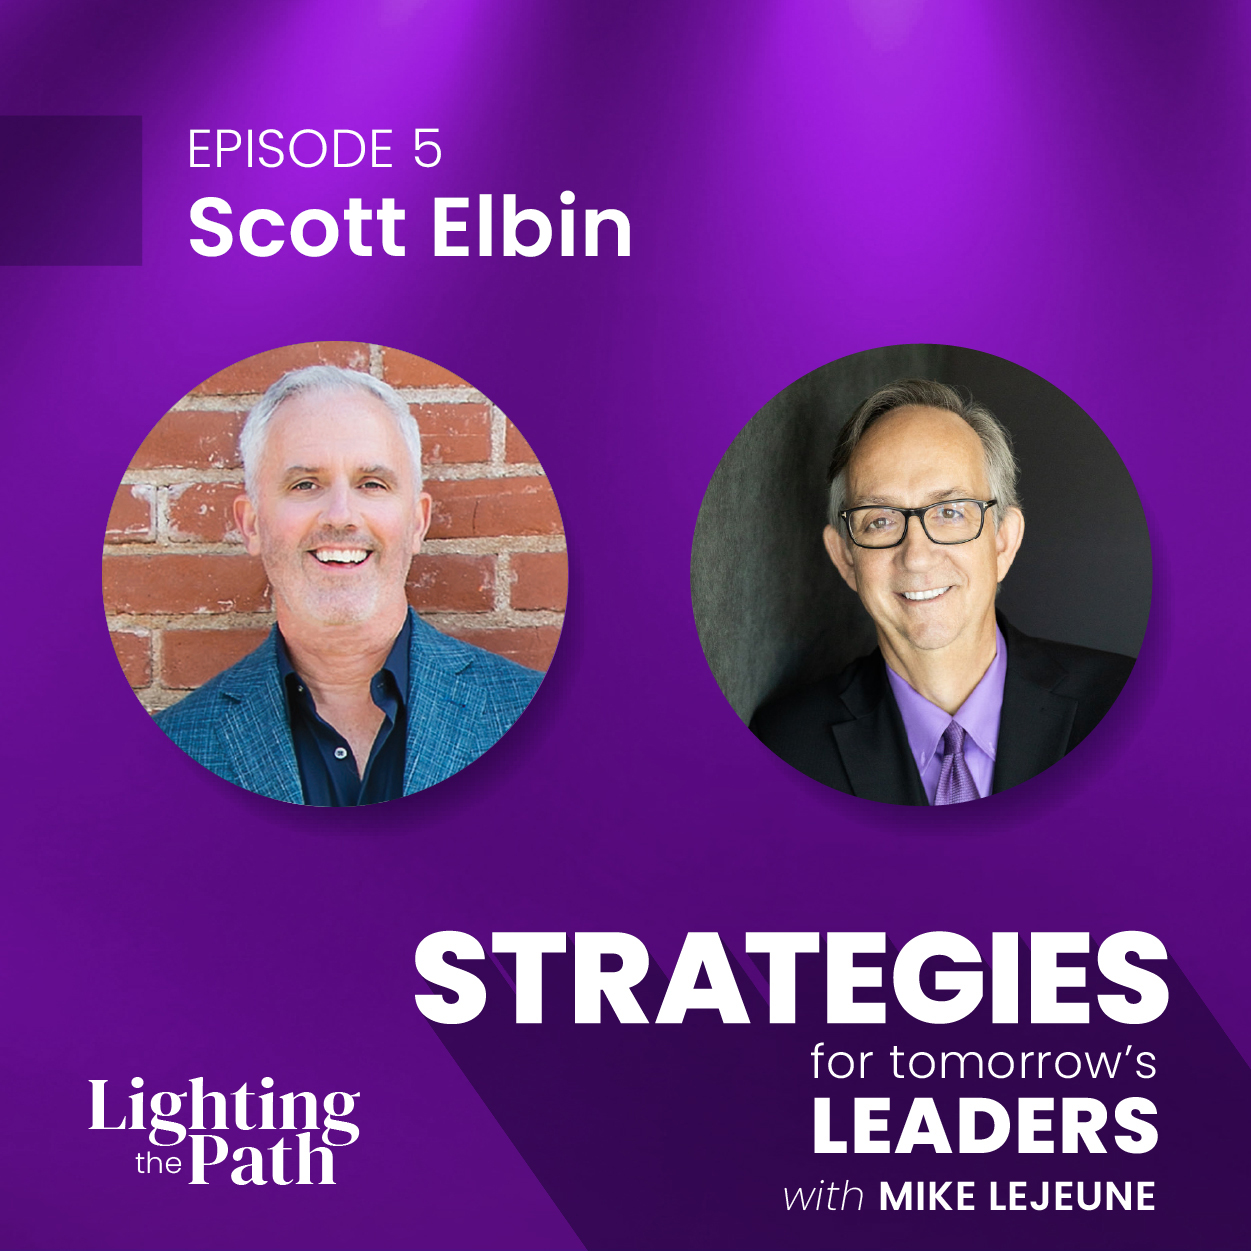 Podcast Episode 5 Scott Elbin and Mike Lejeune